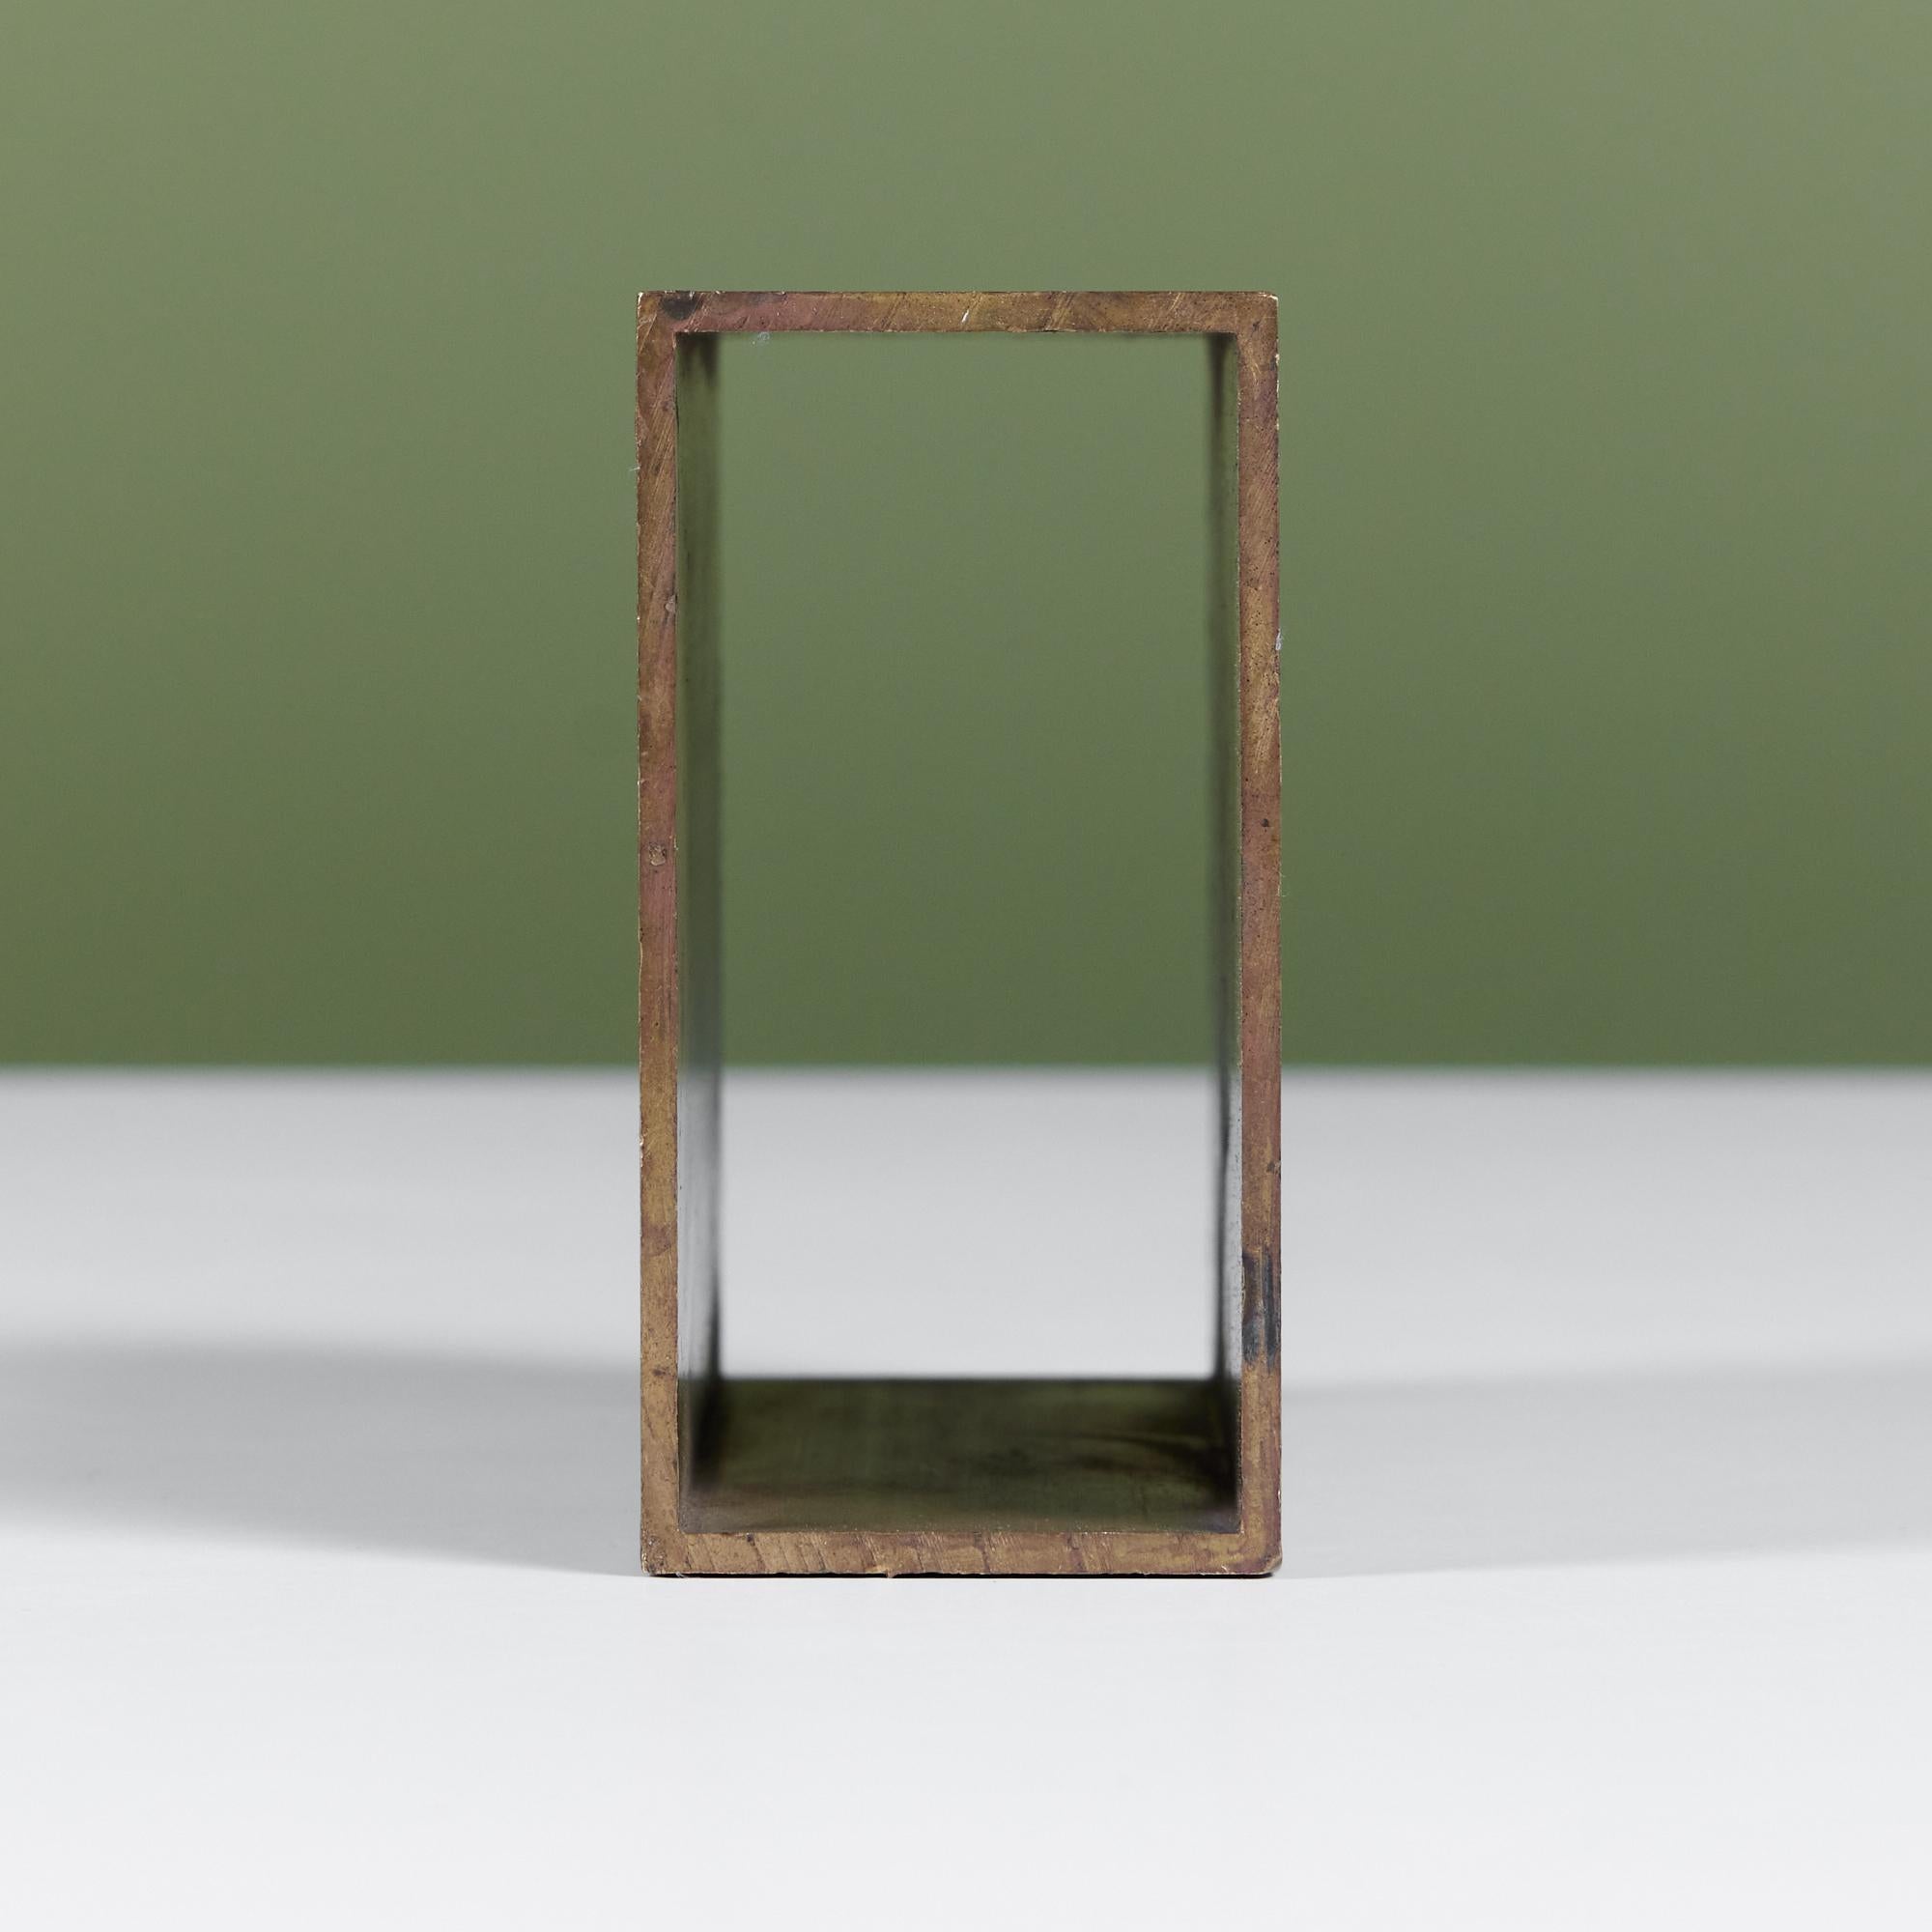 Hollow Brass Rectangular Object In Good Condition For Sale In Los Angeles, CA